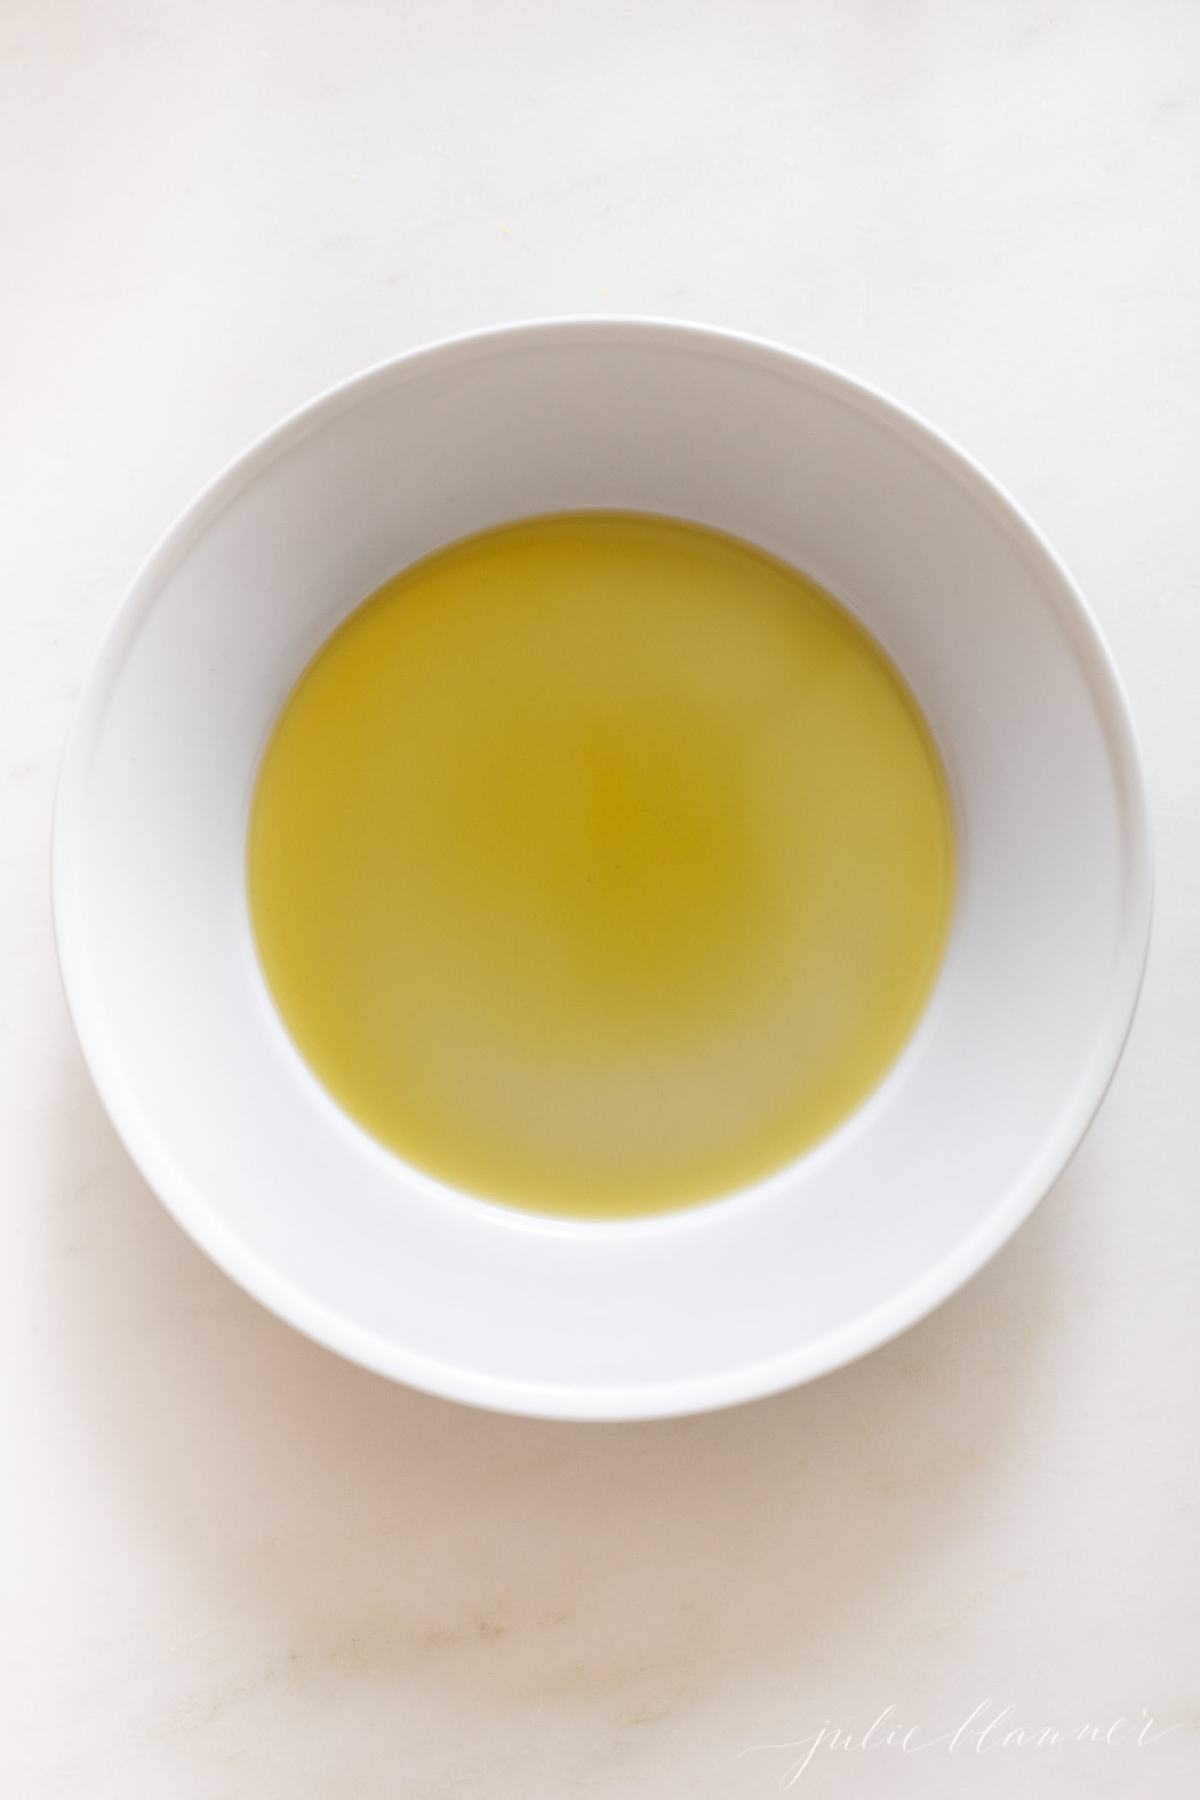 olive oil on a plate